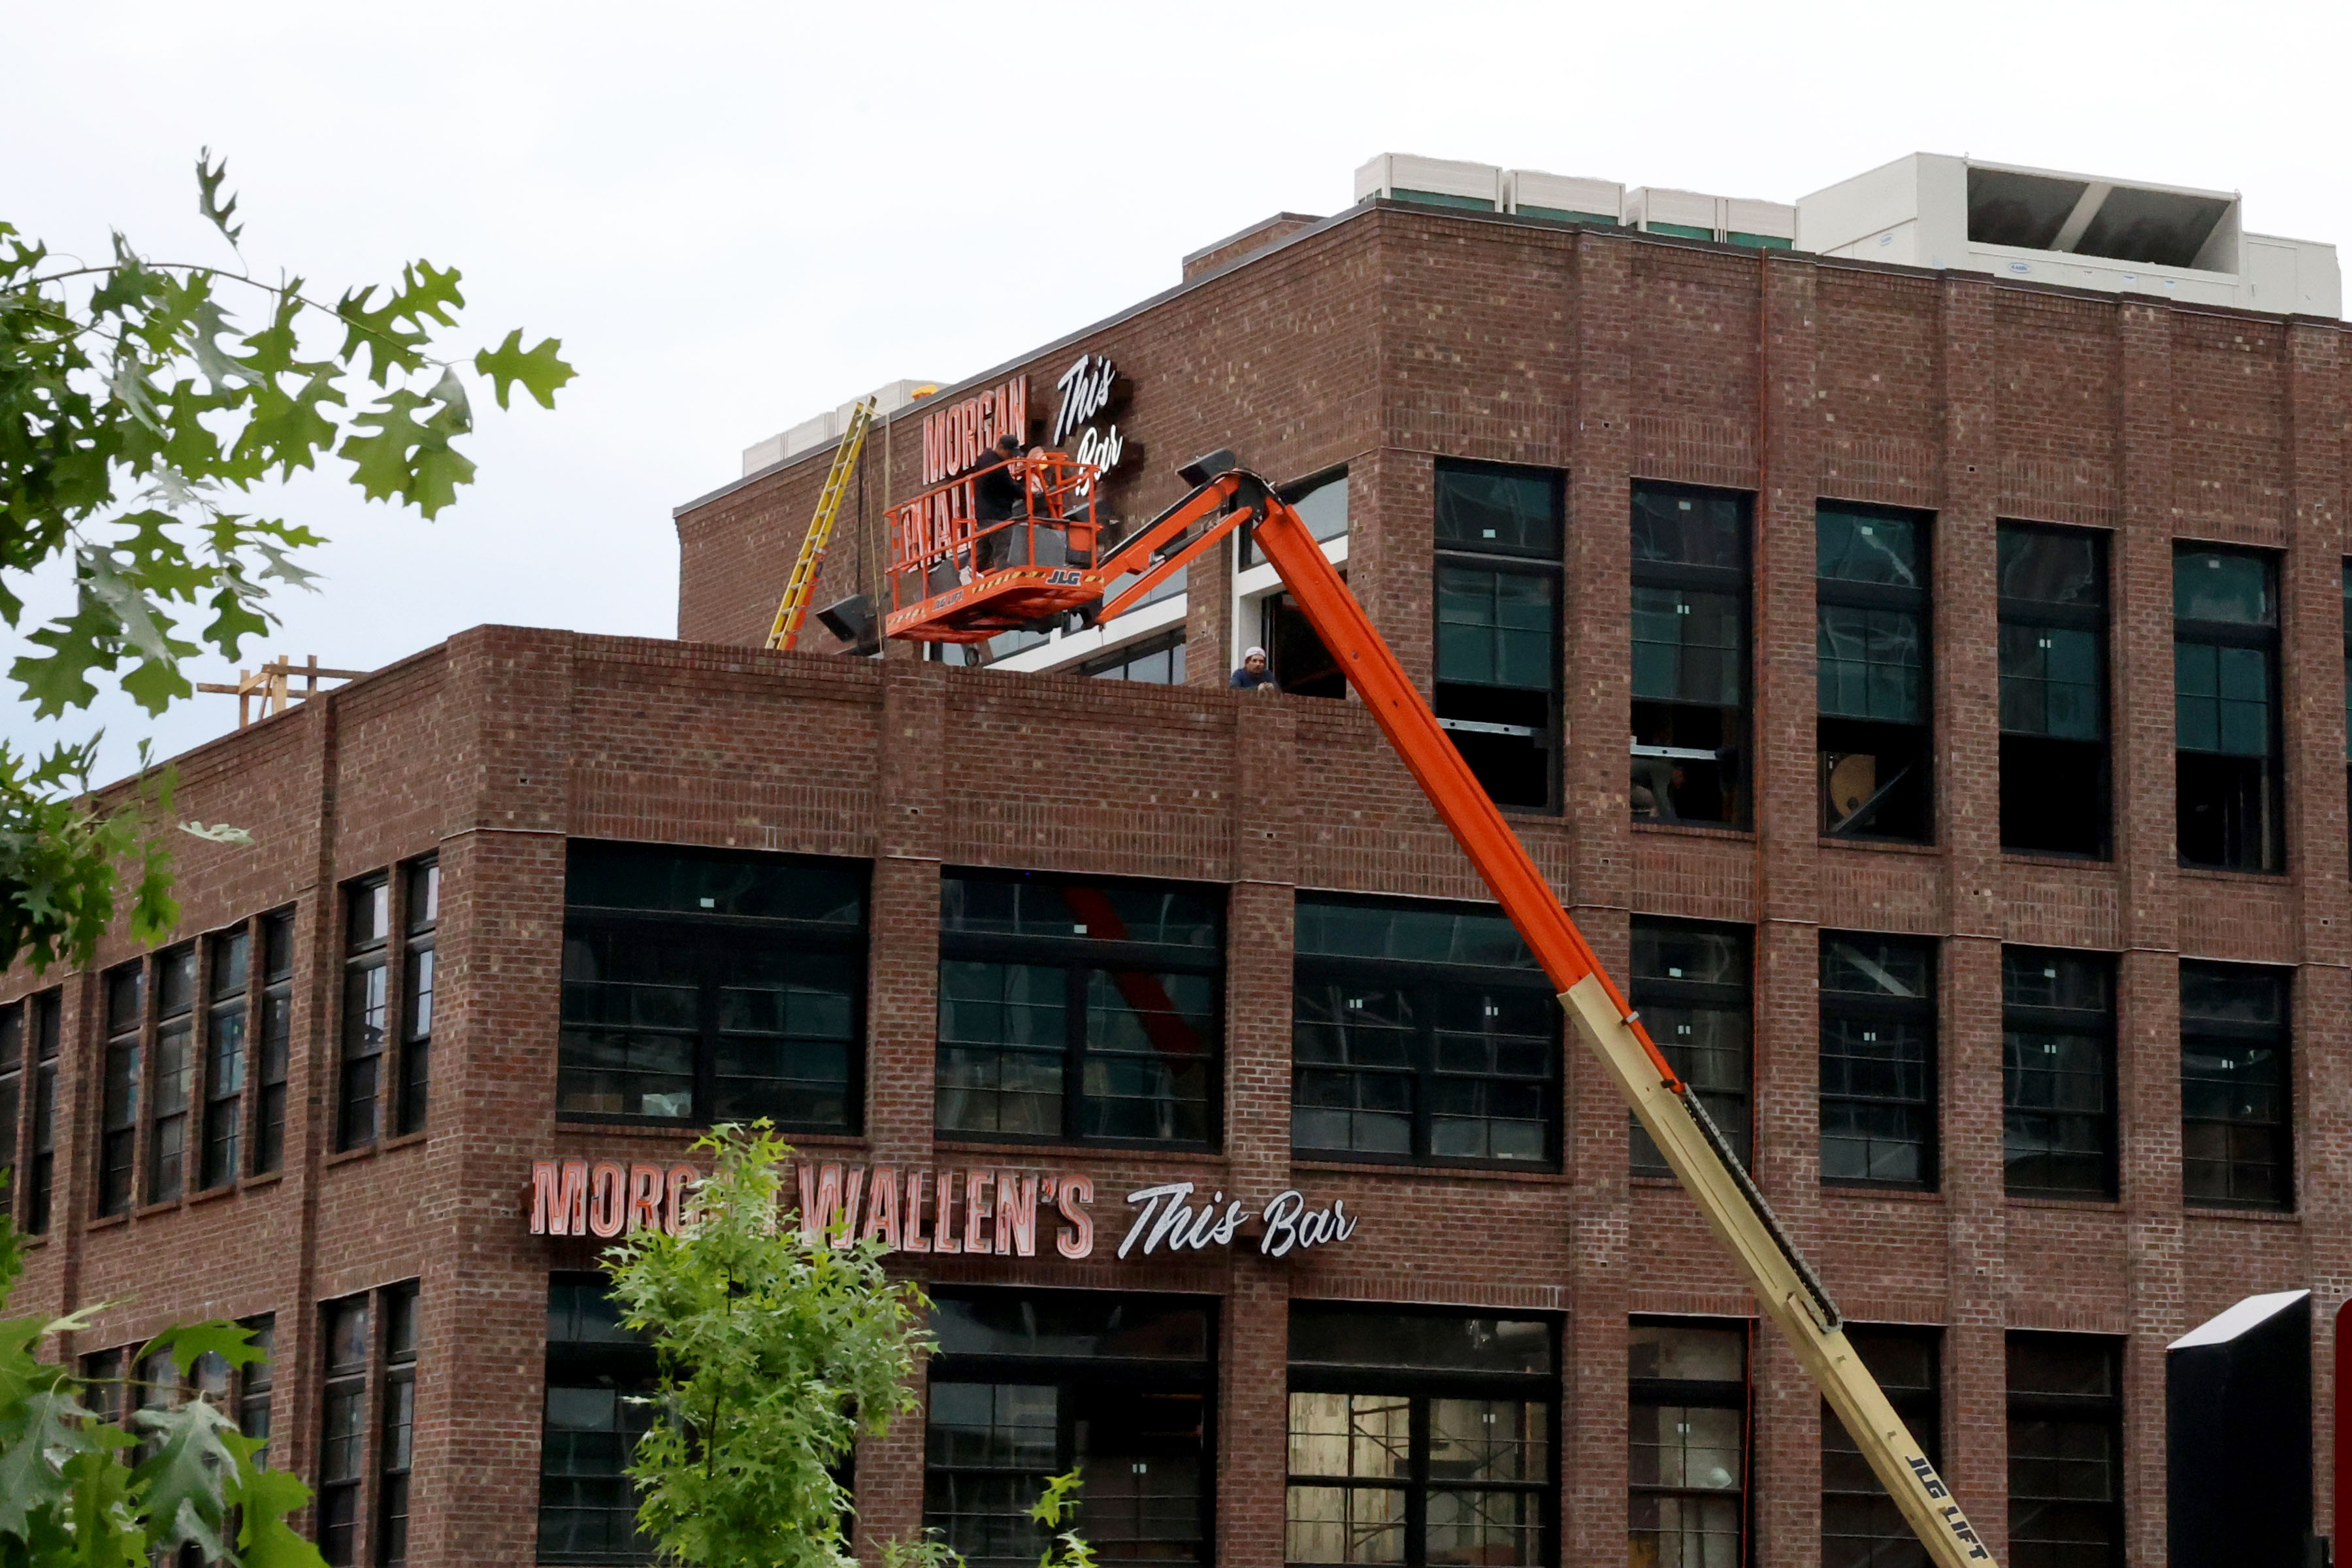 Workers appeared to be placing final touches on the sign in front of the building